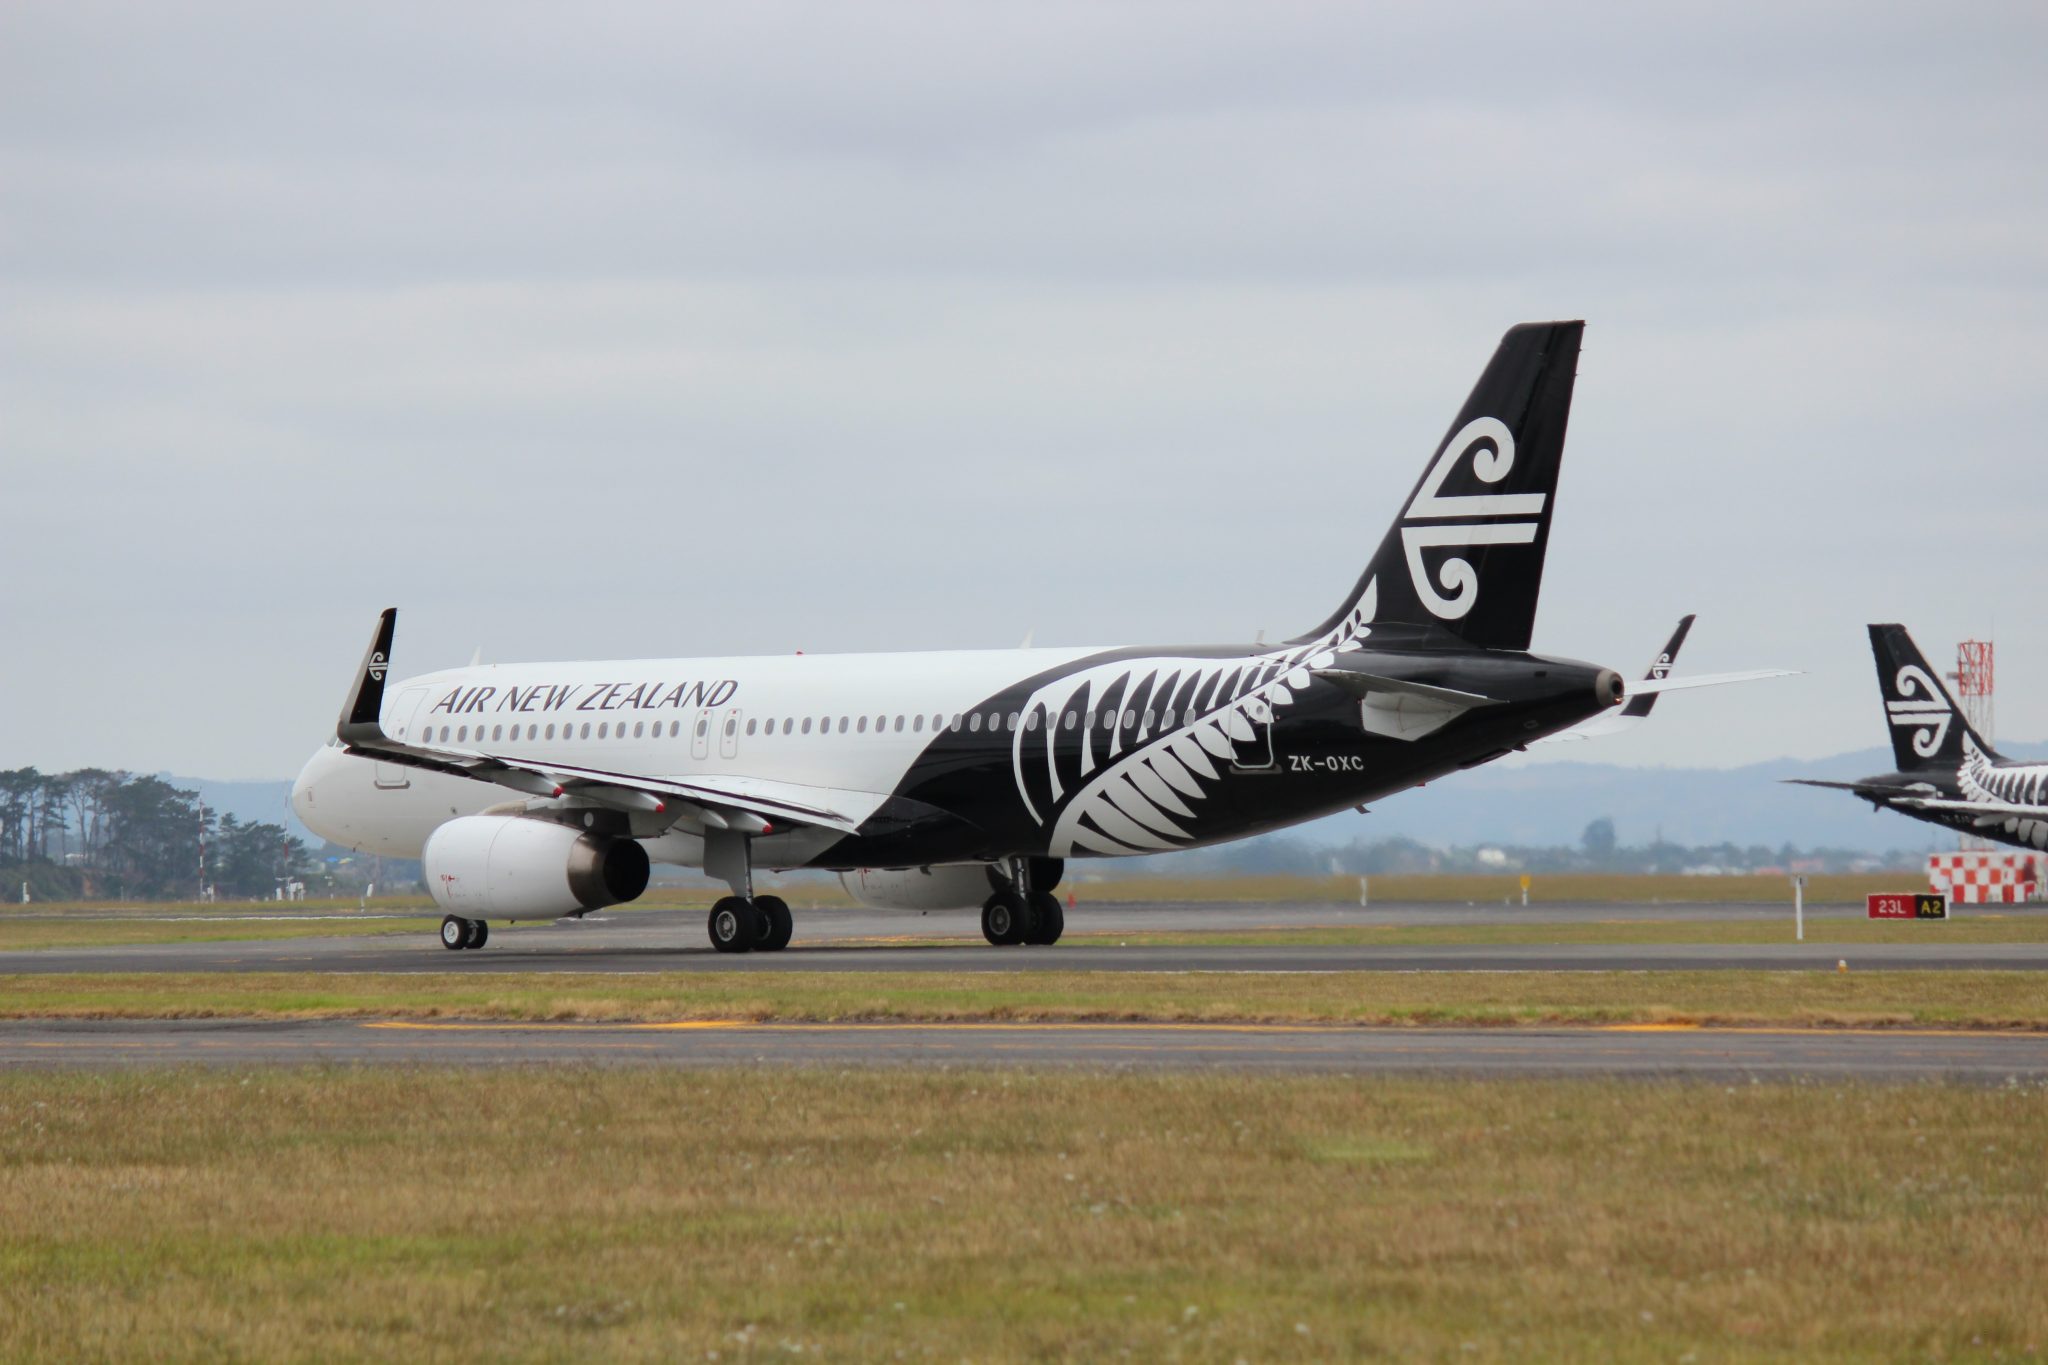 The government is stepping in to manage bookings for Air New Zealand, to ensure there are adequate numbers of isolation facilities for returning citizens to stay in.